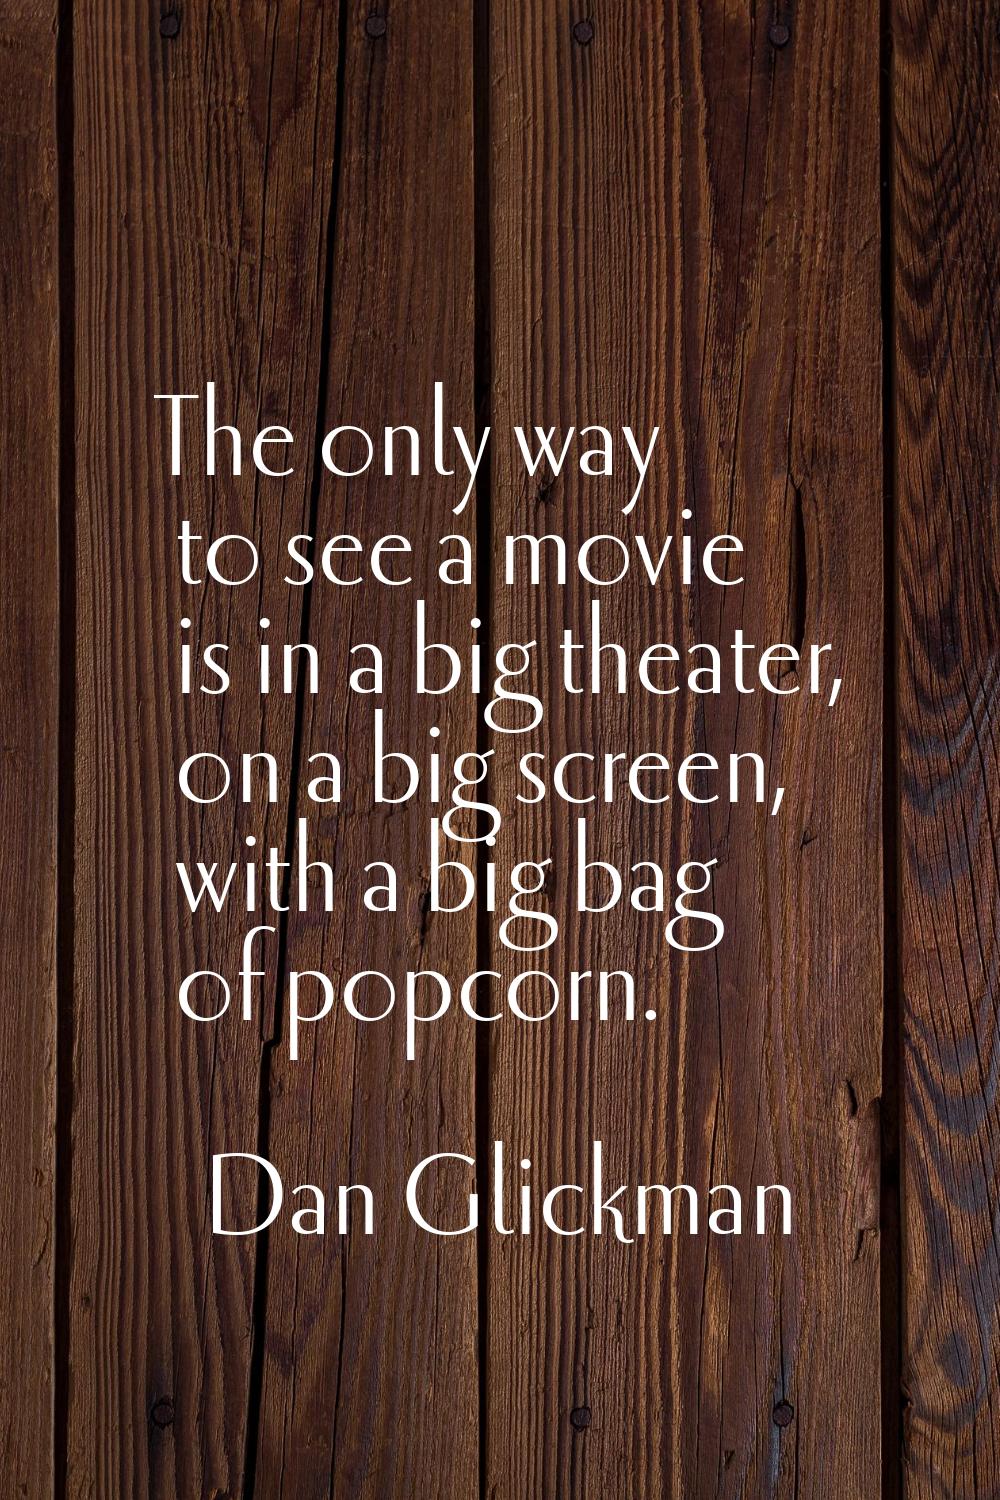 The only way to see a movie is in a big theater, on a big screen, with a big bag of popcorn.